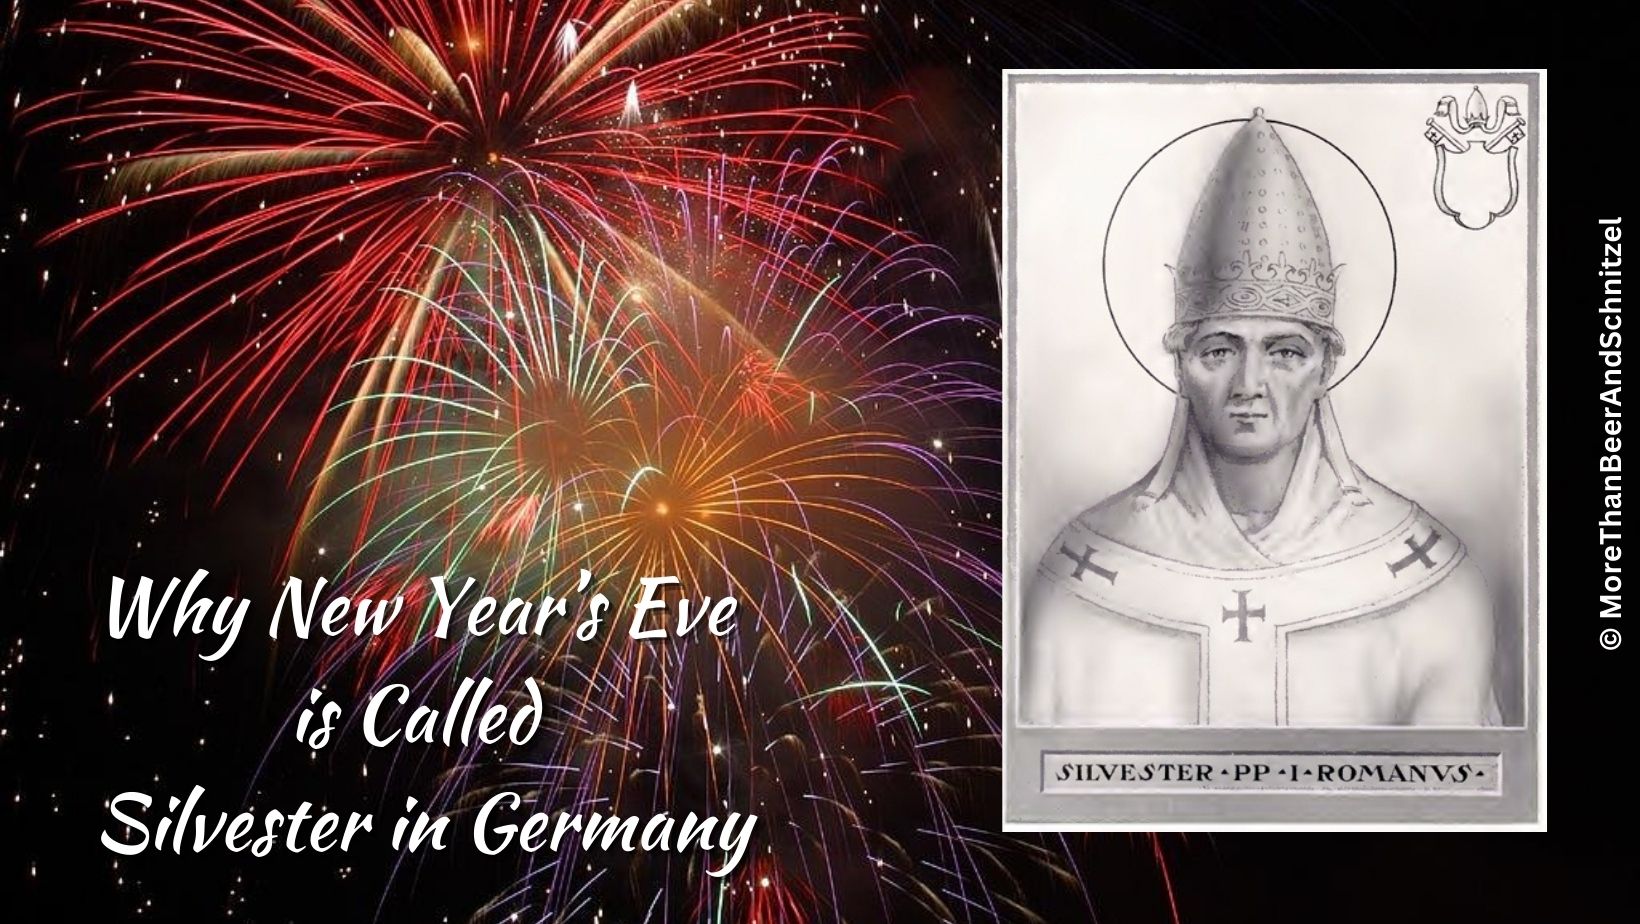 germany silvester new year's eve pope sylvester